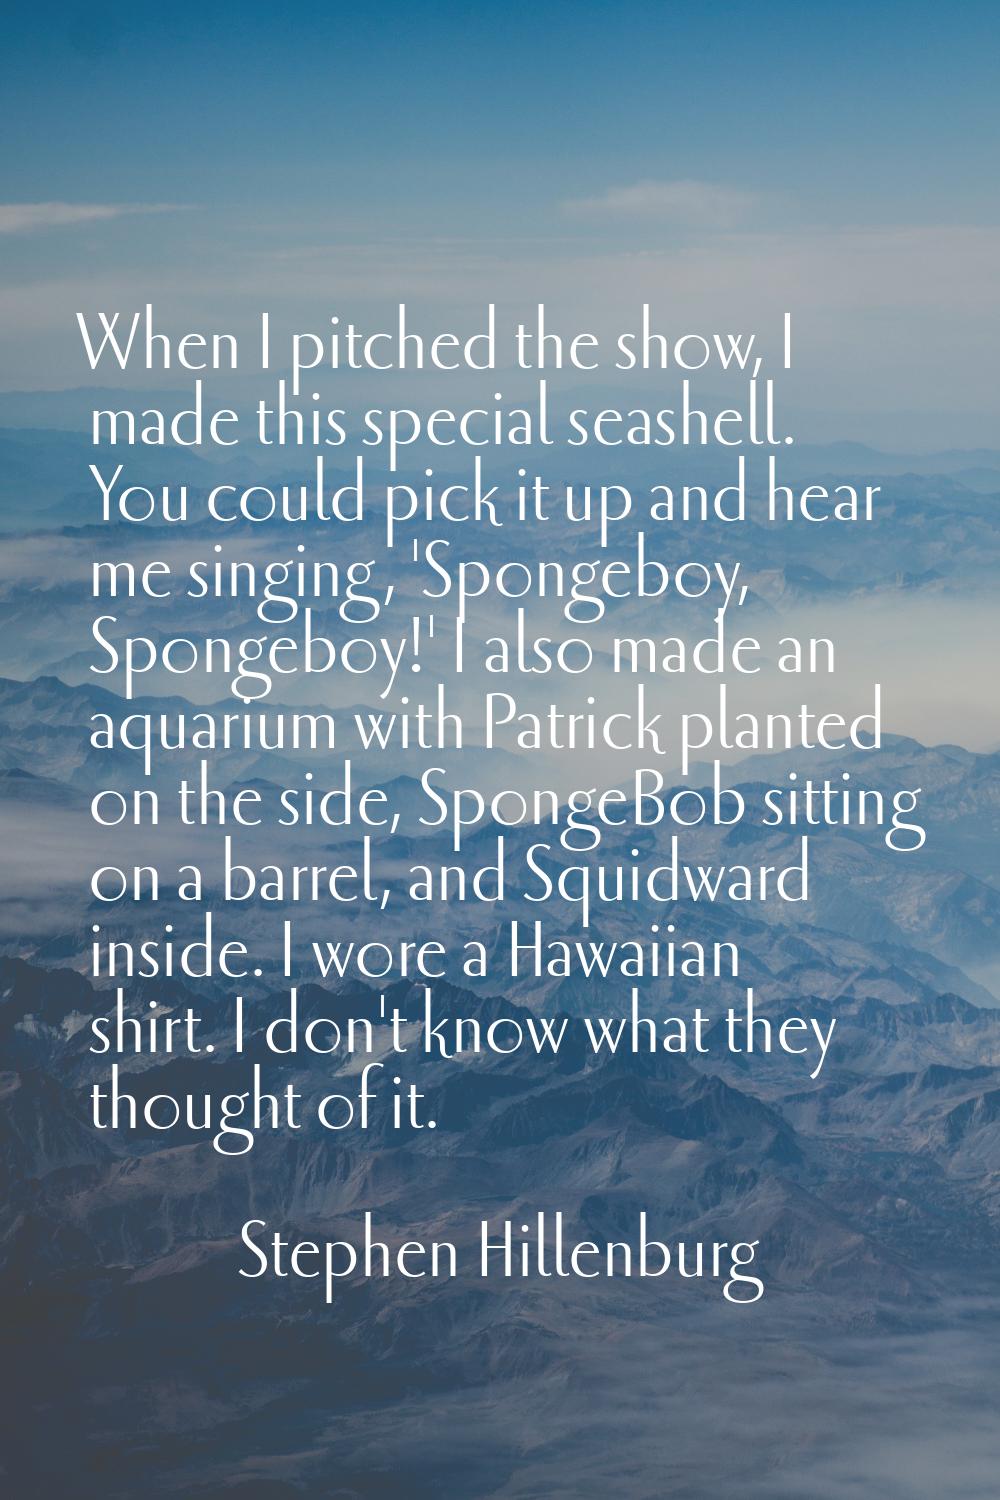 When I pitched the show, I made this special seashell. You could pick it up and hear me singing, 'S